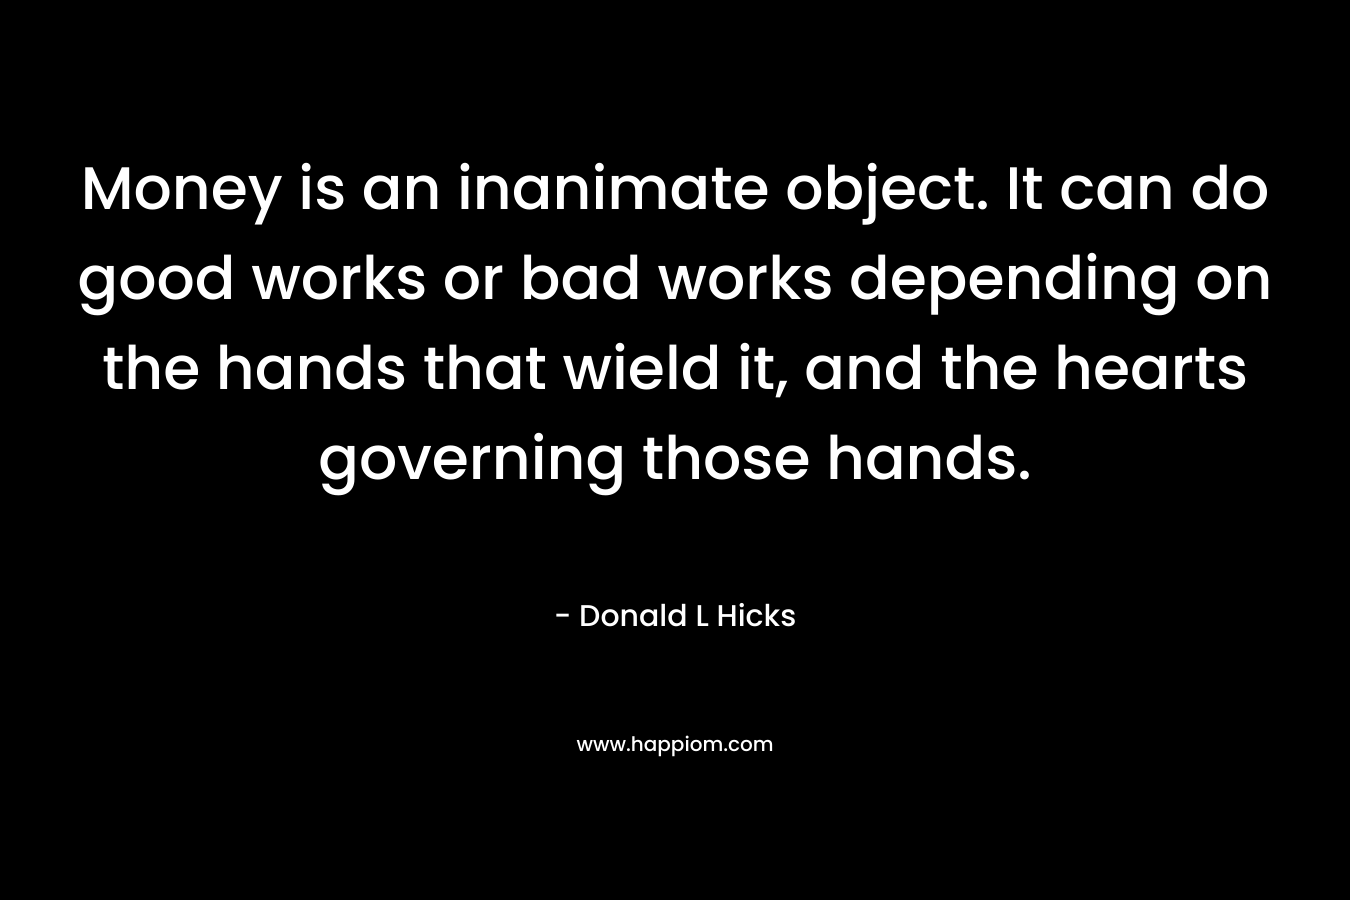 Money is an inanimate object. It can do good works or bad works depending on the hands that wield it, and the hearts governing those hands. – Donald L Hicks